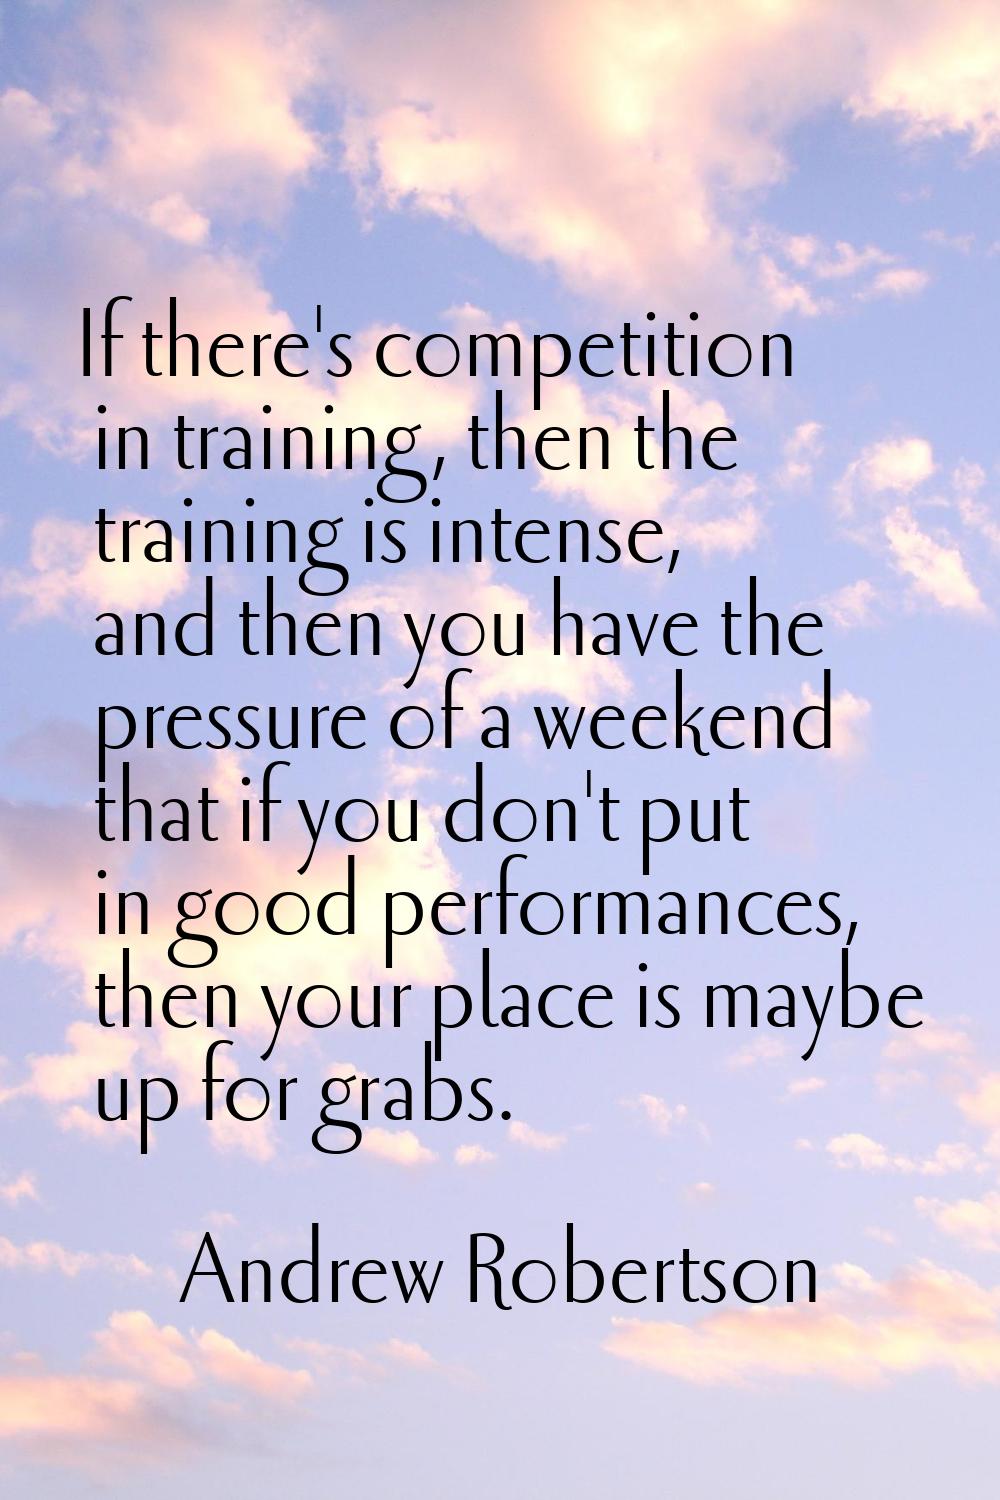 If there's competition in training, then the training is intense, and then you have the pressure of